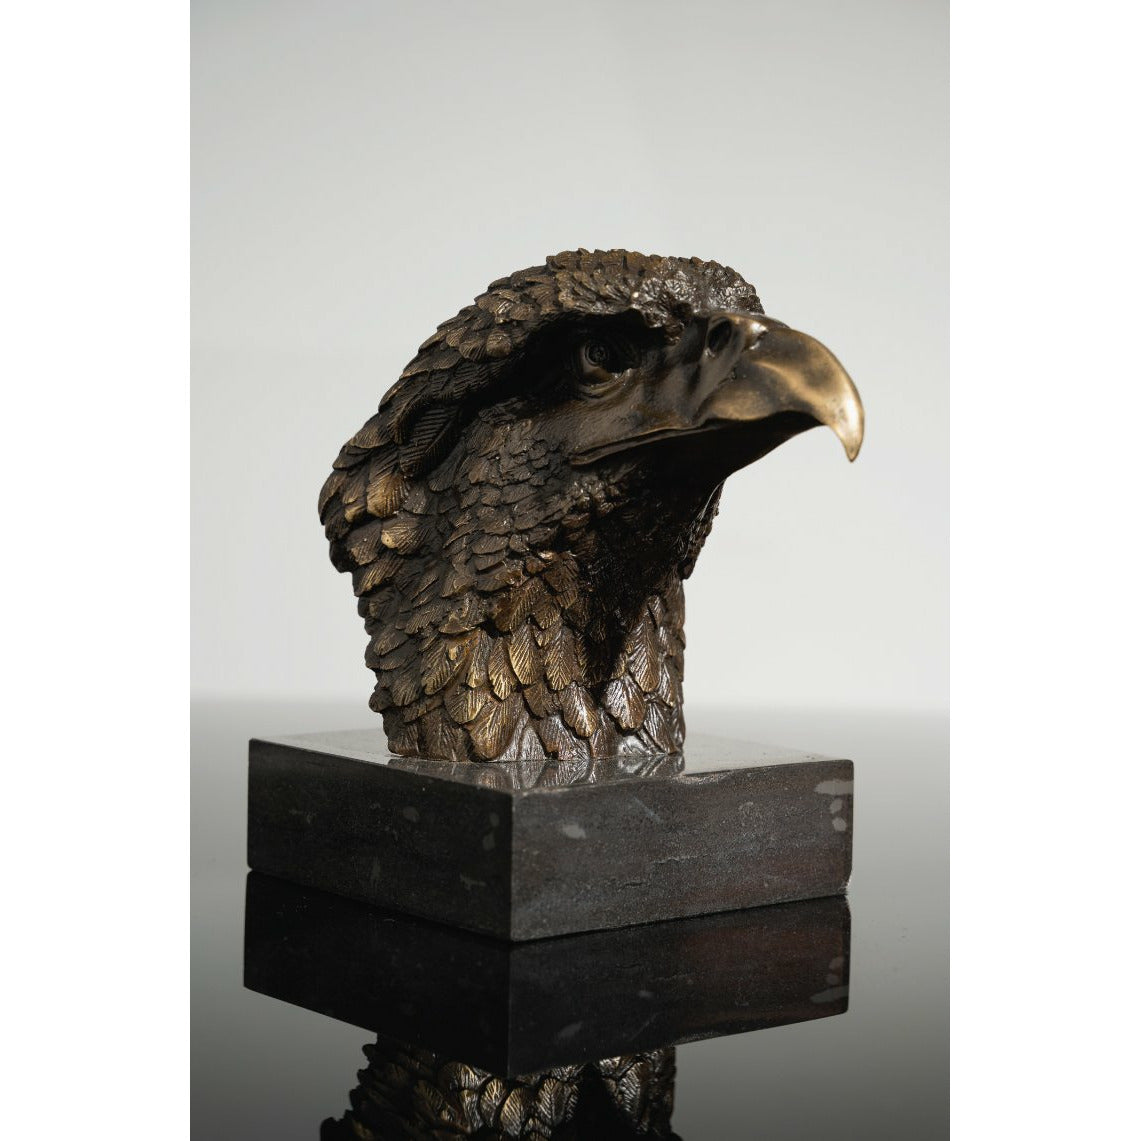 Bronze & Marble Eagle Head Sculpture - Our Bronze & Marble Eagle Head Sculpture is the perfect addition to any space.